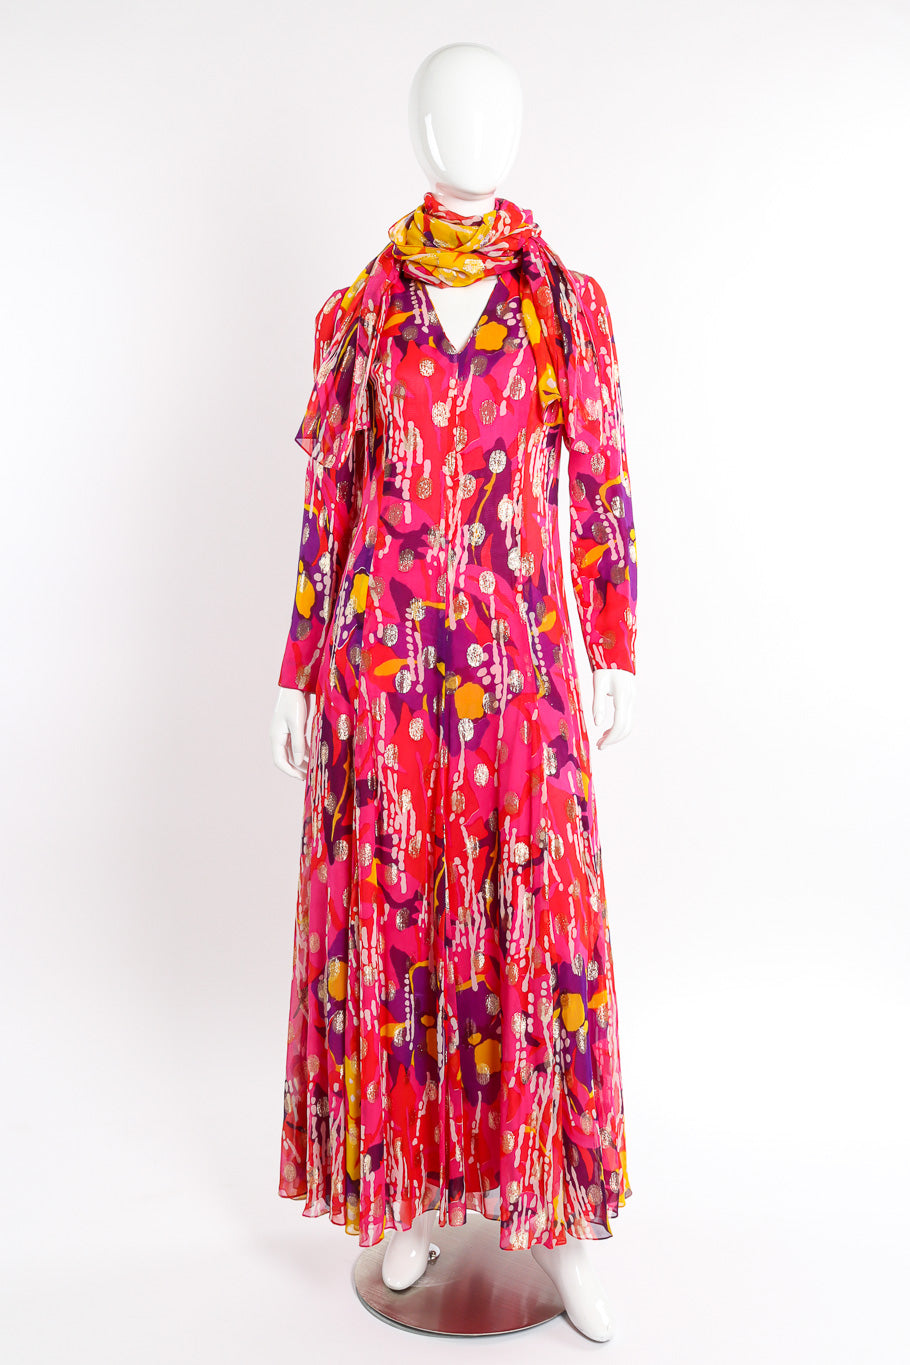 Vintage Doreen Loh Abstract Floral Print Maxi Dress front view on mannequin with sash around neck @Recessla